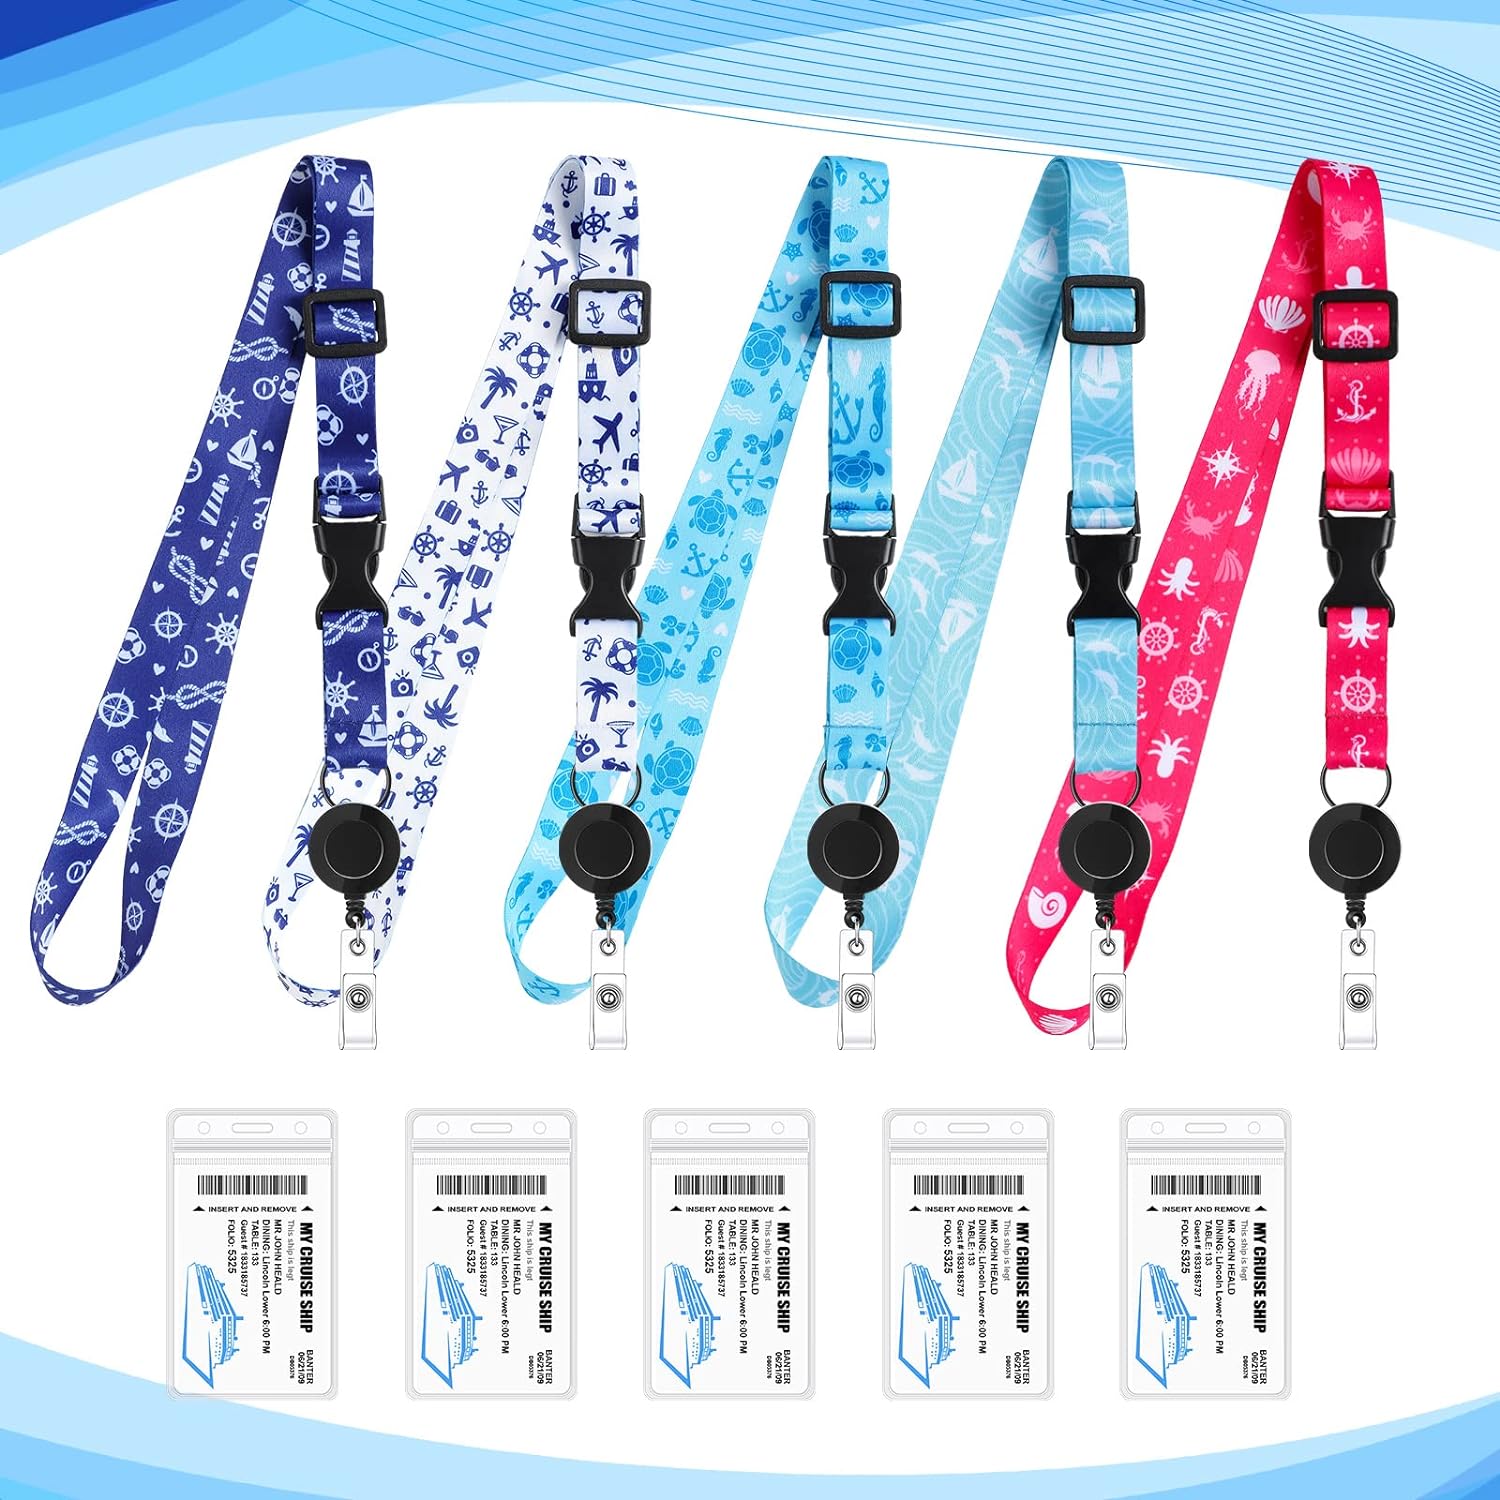 5 Sets Cruise Lanyards Pattern Adjustable Lanyard with Retractable Reel Waterproof ID Badge Holders for Cruises Ship Cards Accessories (Vivid Style)